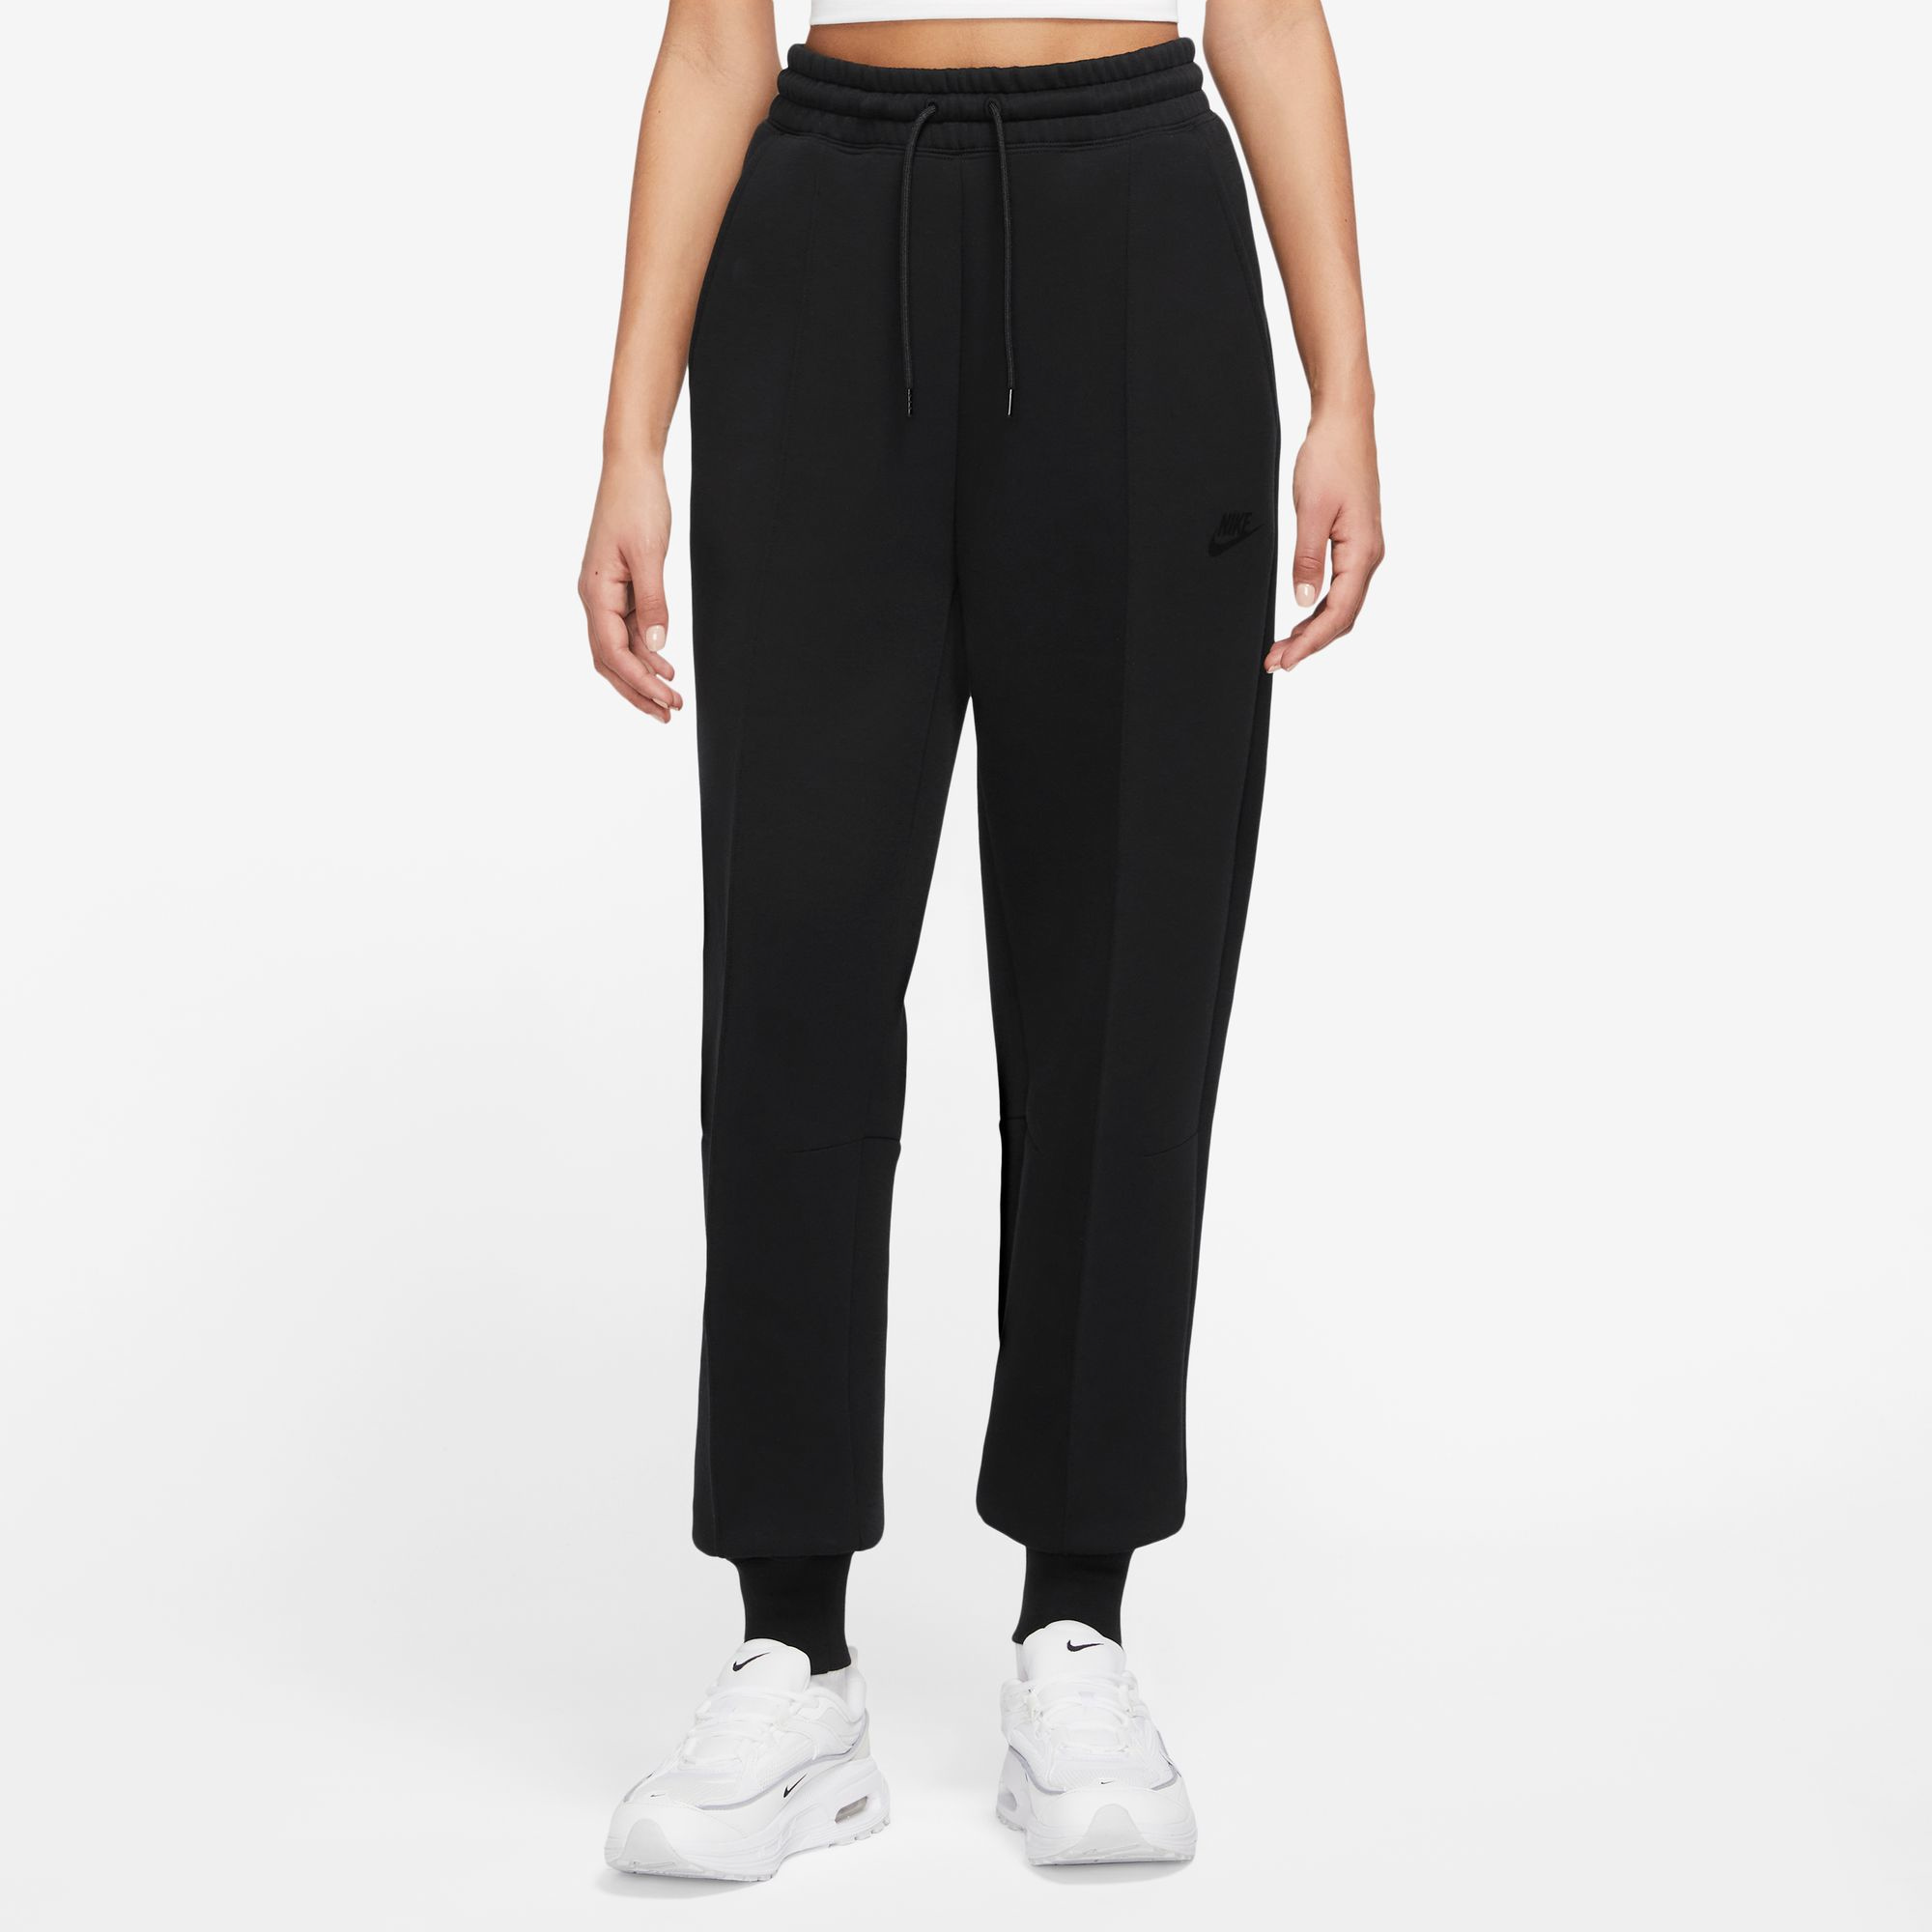 Mid-Rise Houndstooth Jogger Pant - 28